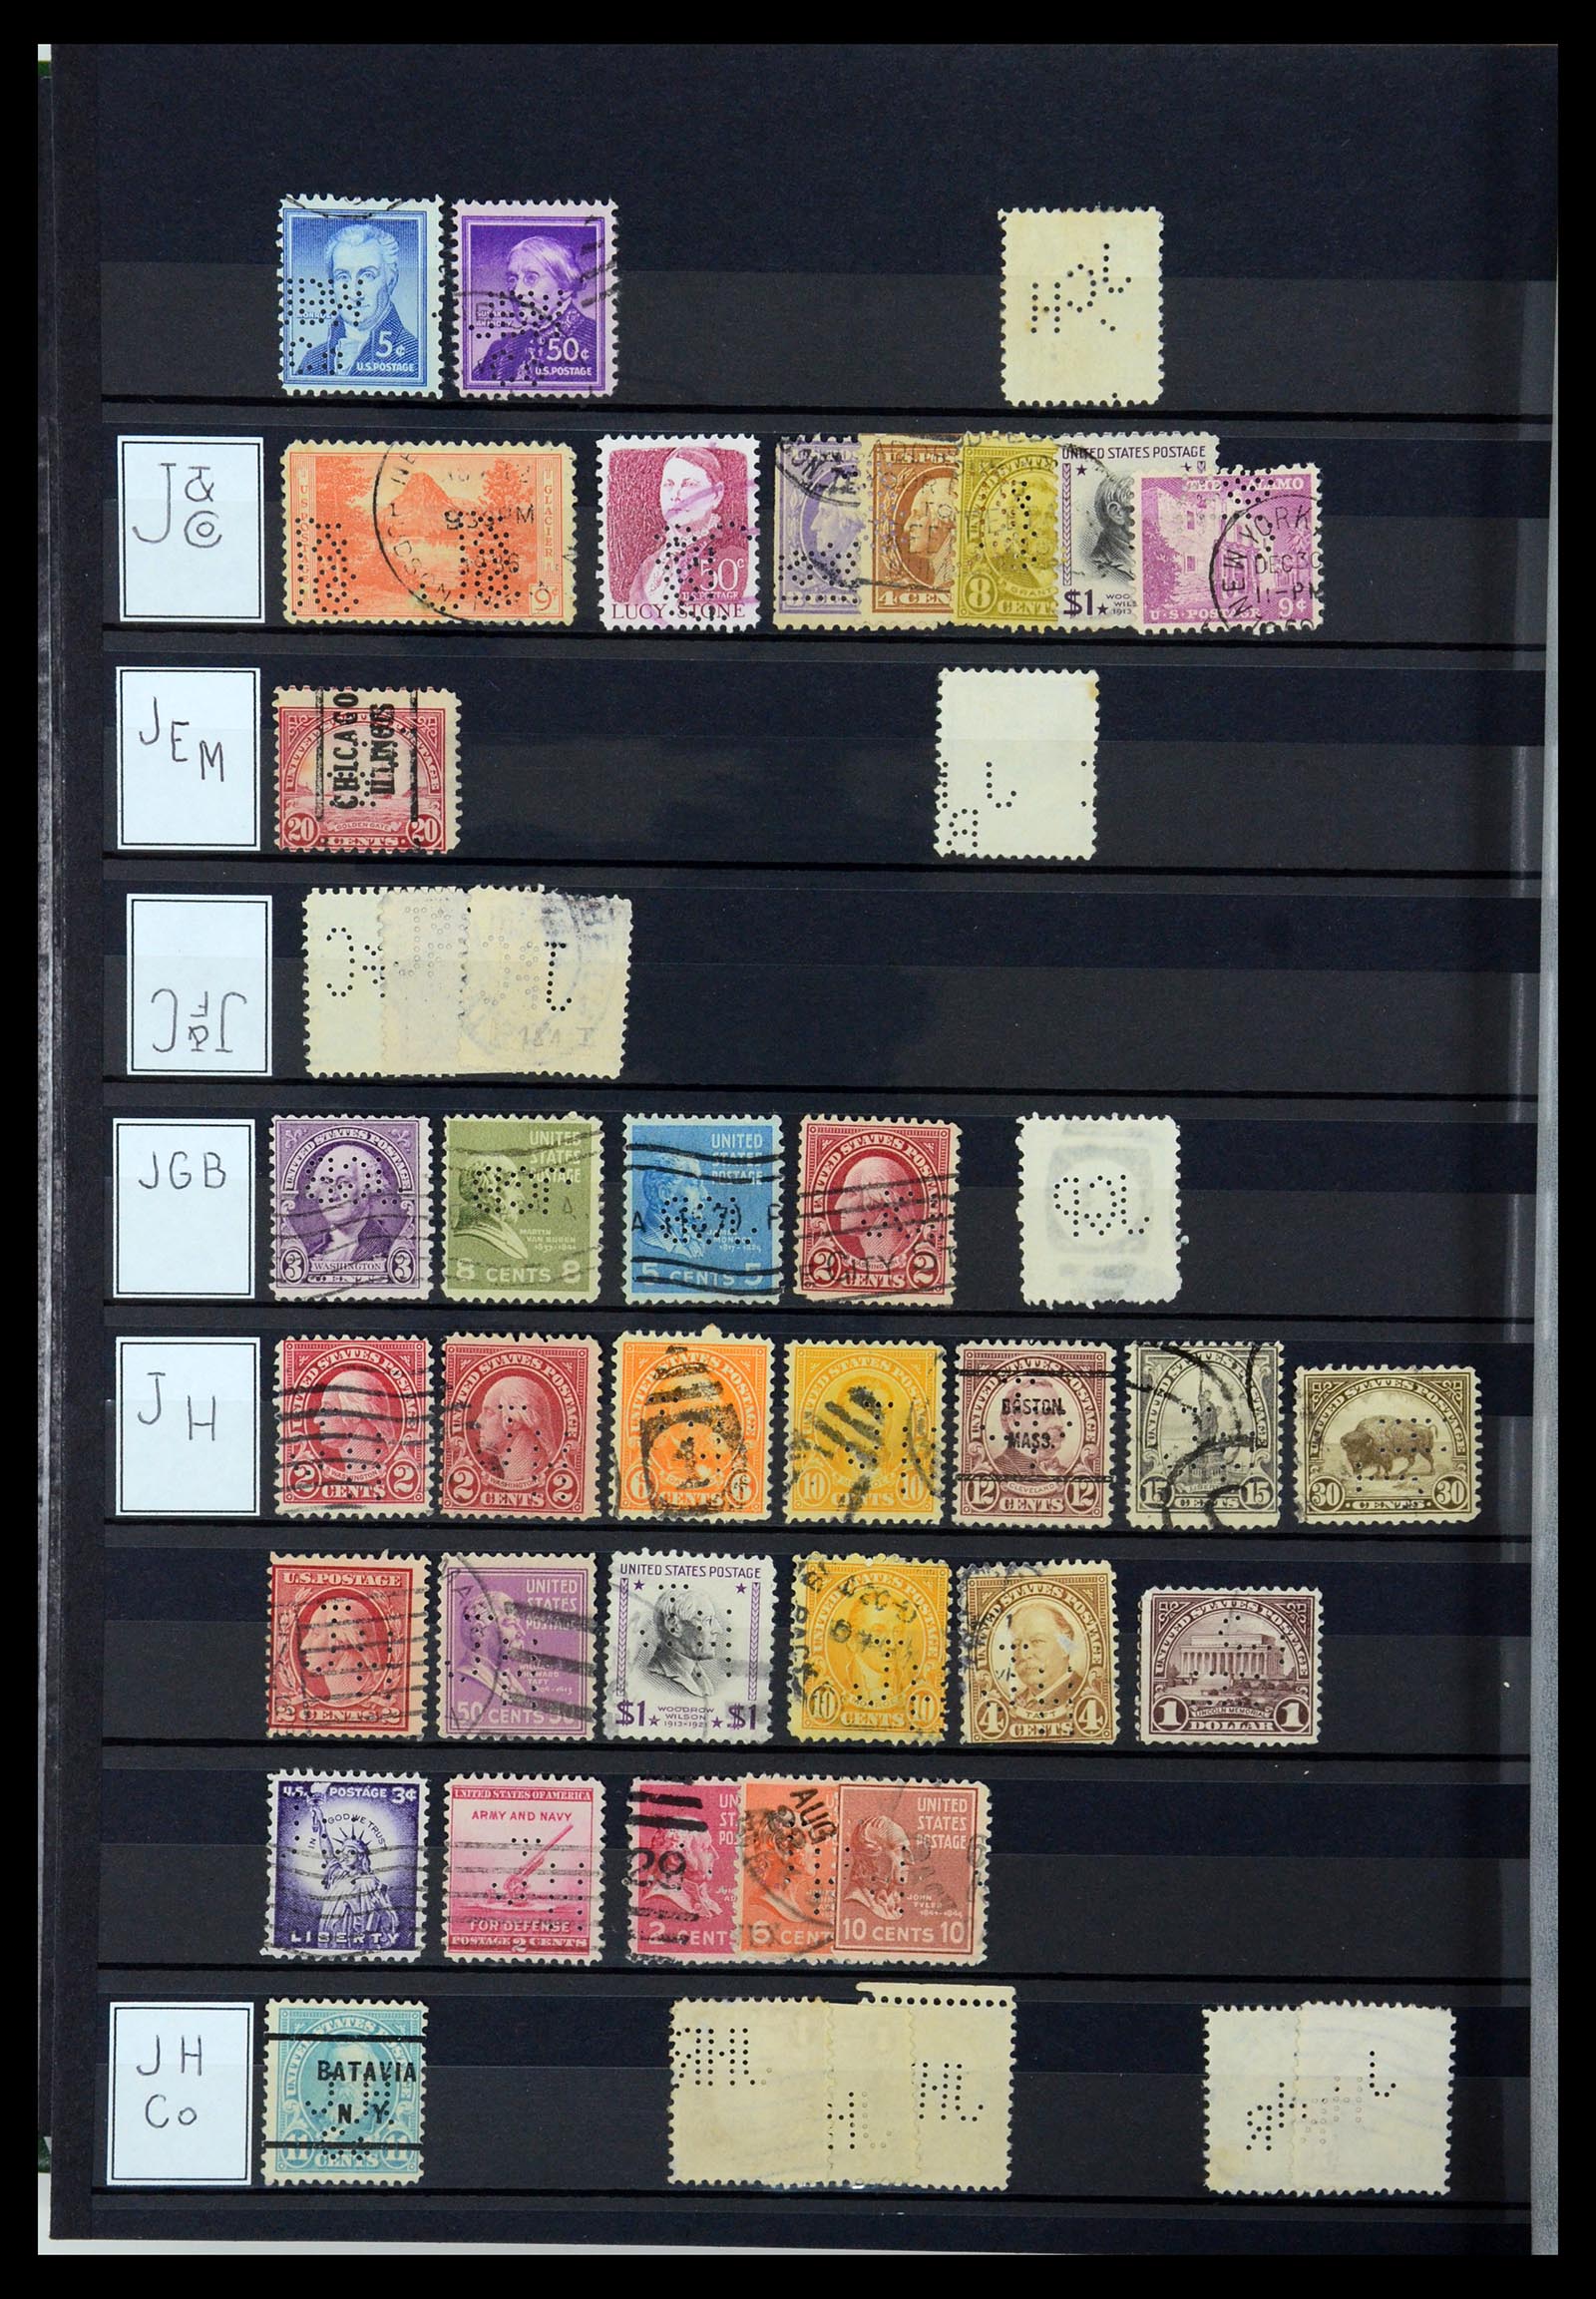 36388 072 - Stamp collection 36388 USA perfins.